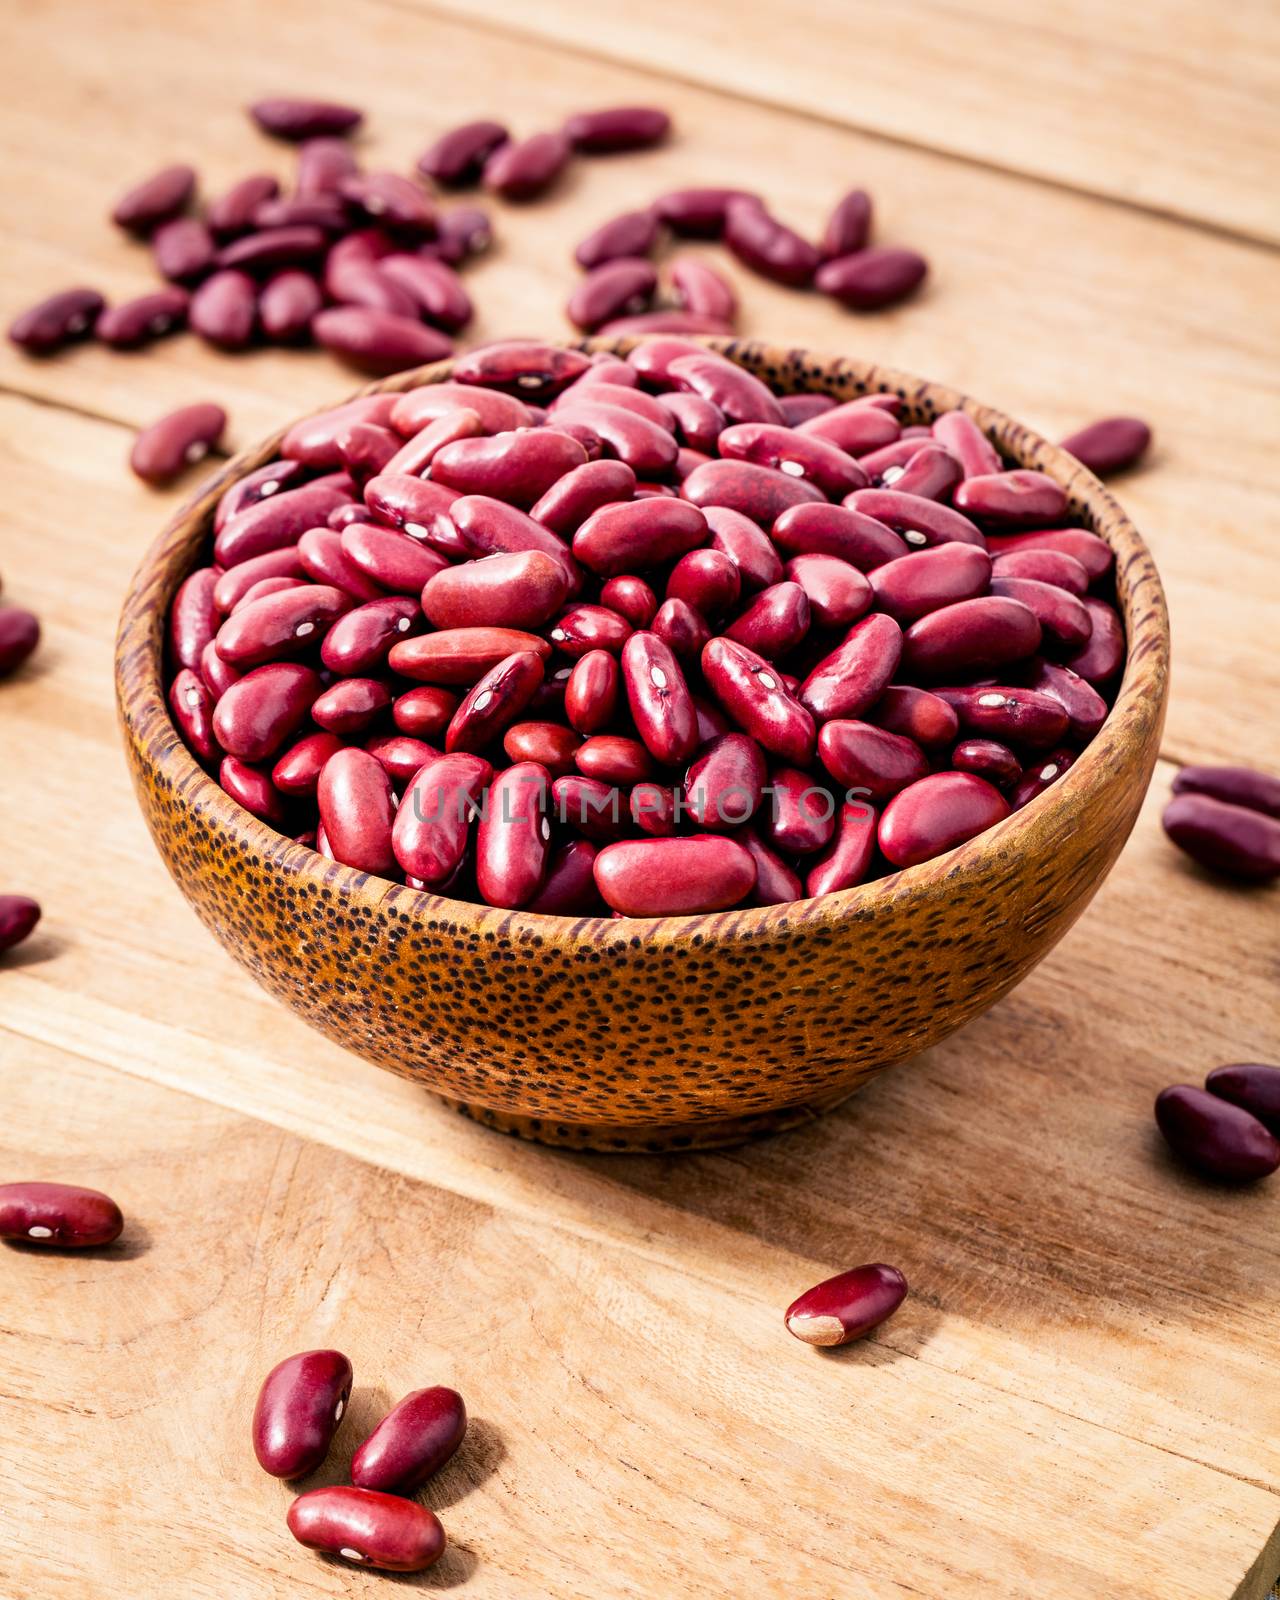 Close up red kidney beans in wooden bowl on wooden background. Selective focus depth of field.